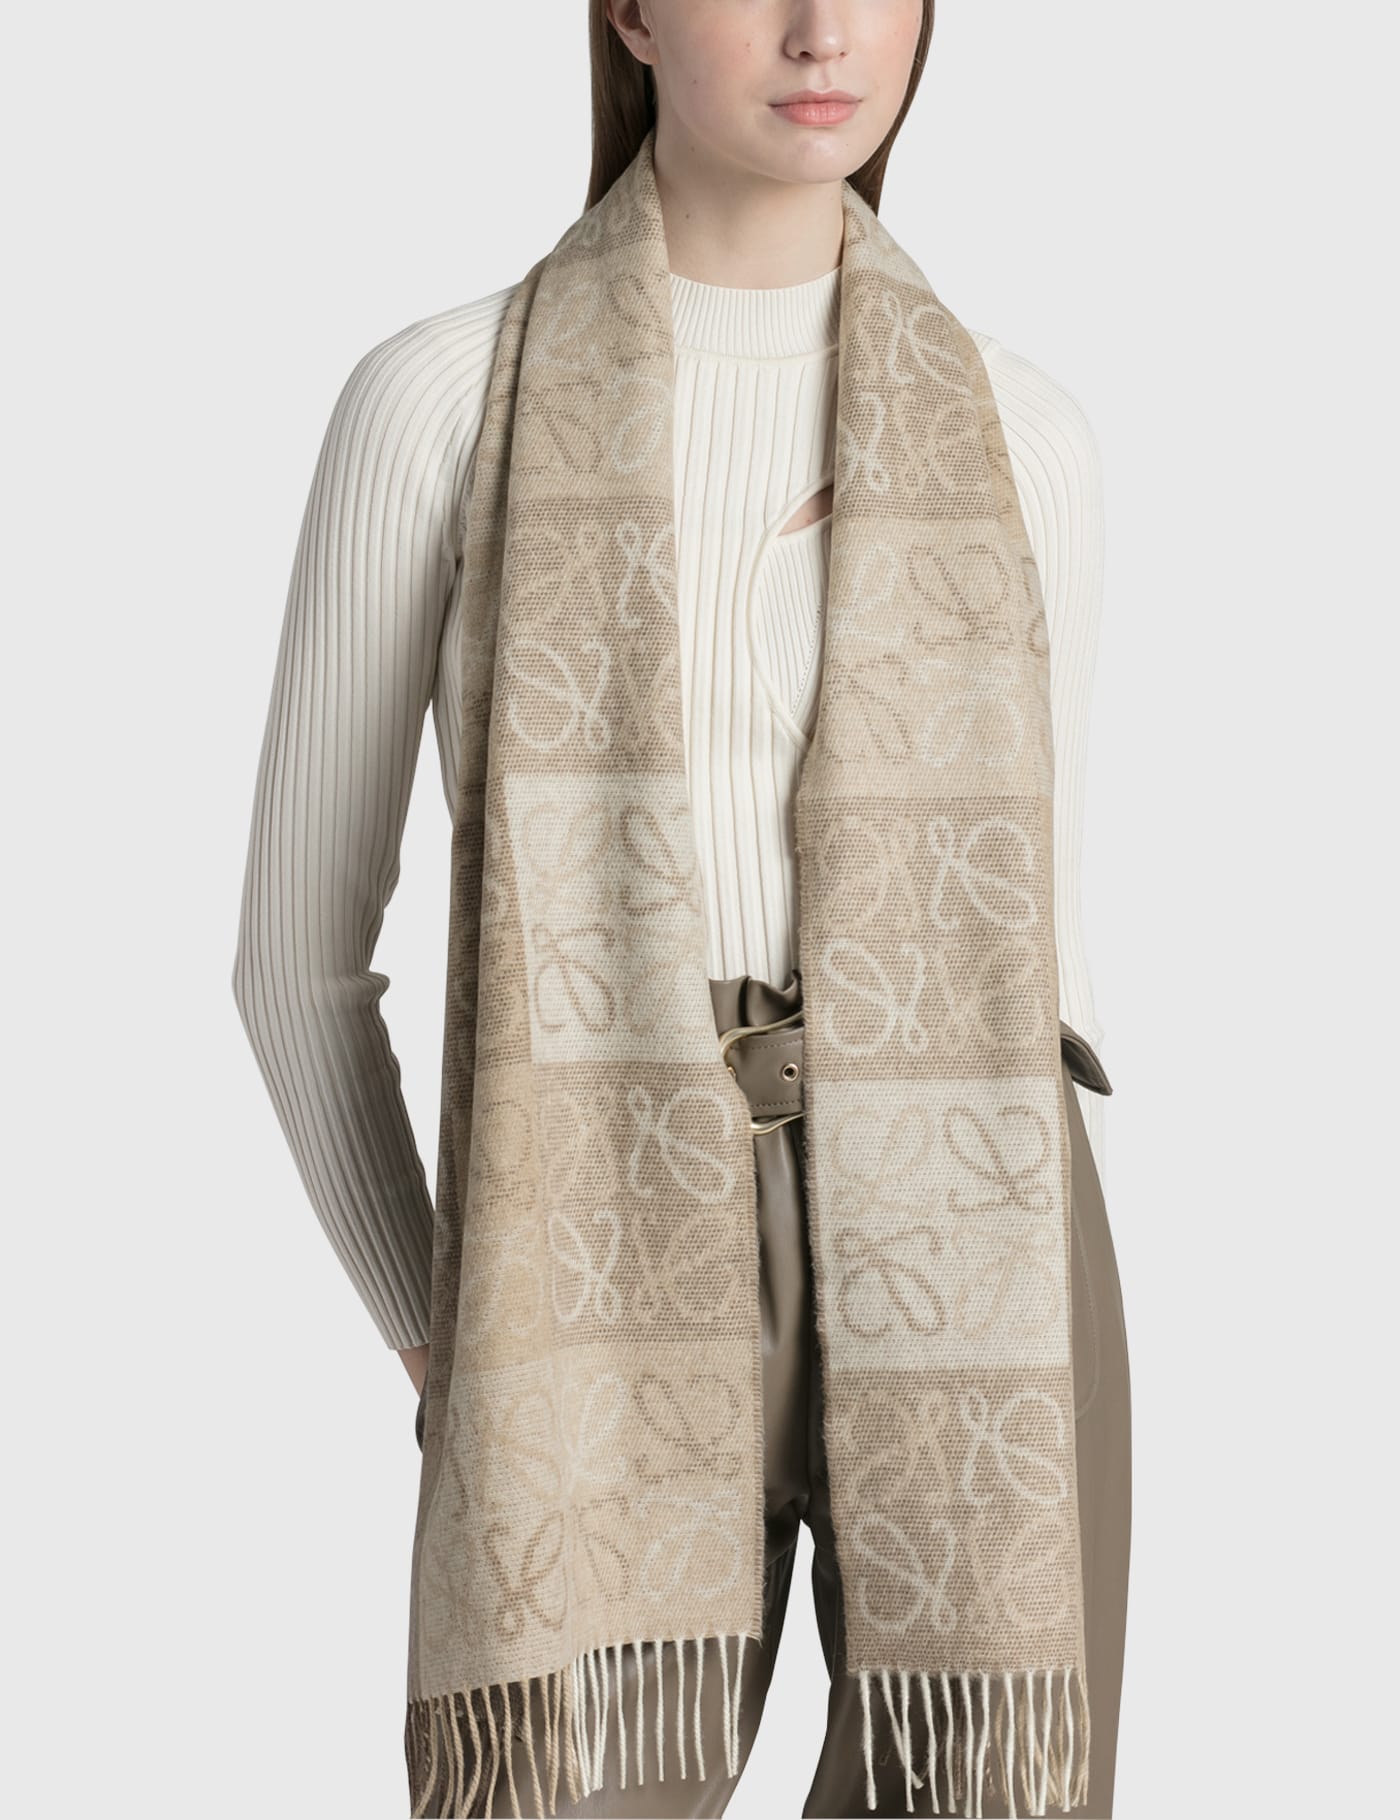 Loewe - Anagram Scarf | HBX - Globally Curated Fashion and 